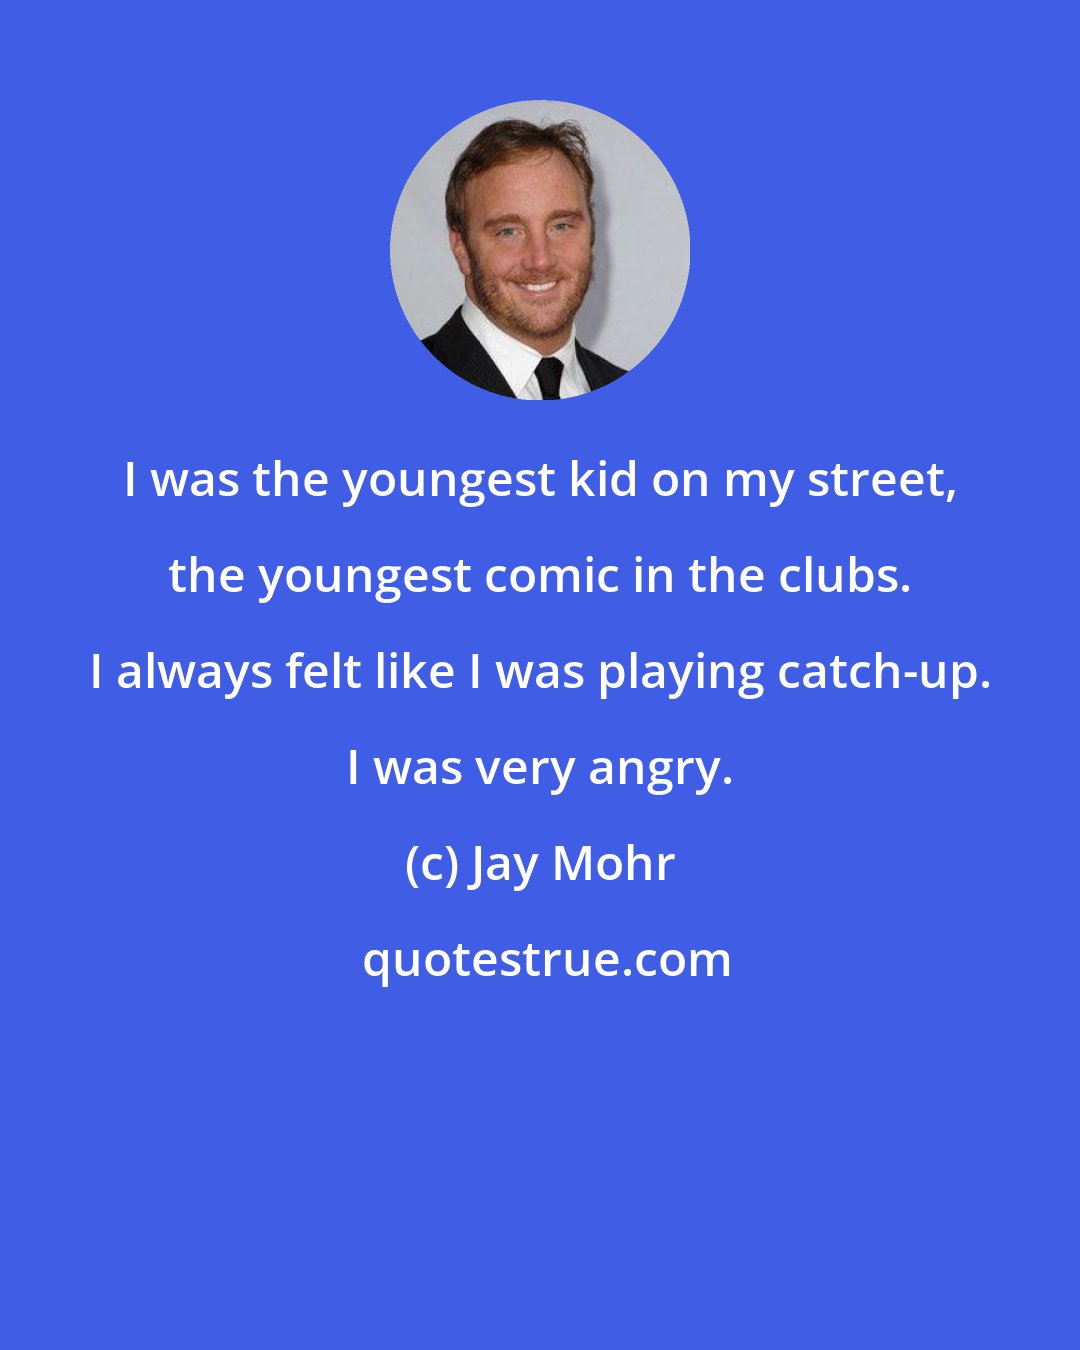 Jay Mohr: I was the youngest kid on my street, the youngest comic in the clubs. I always felt like I was playing catch-up. I was very angry.